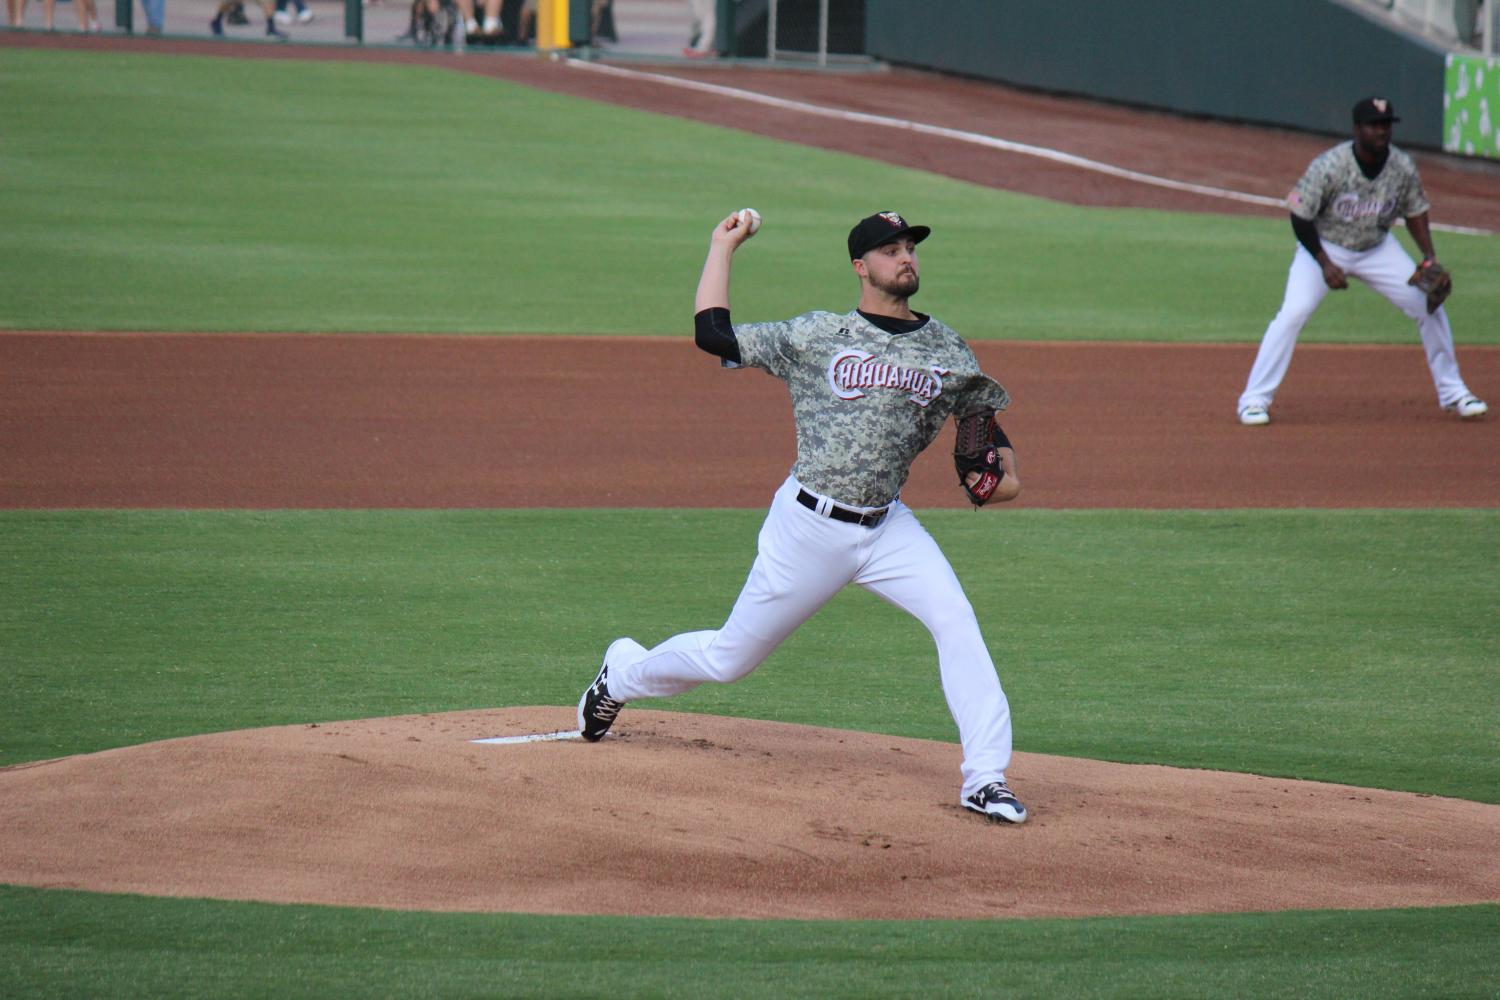 Chihuahuas win big in opening homestand